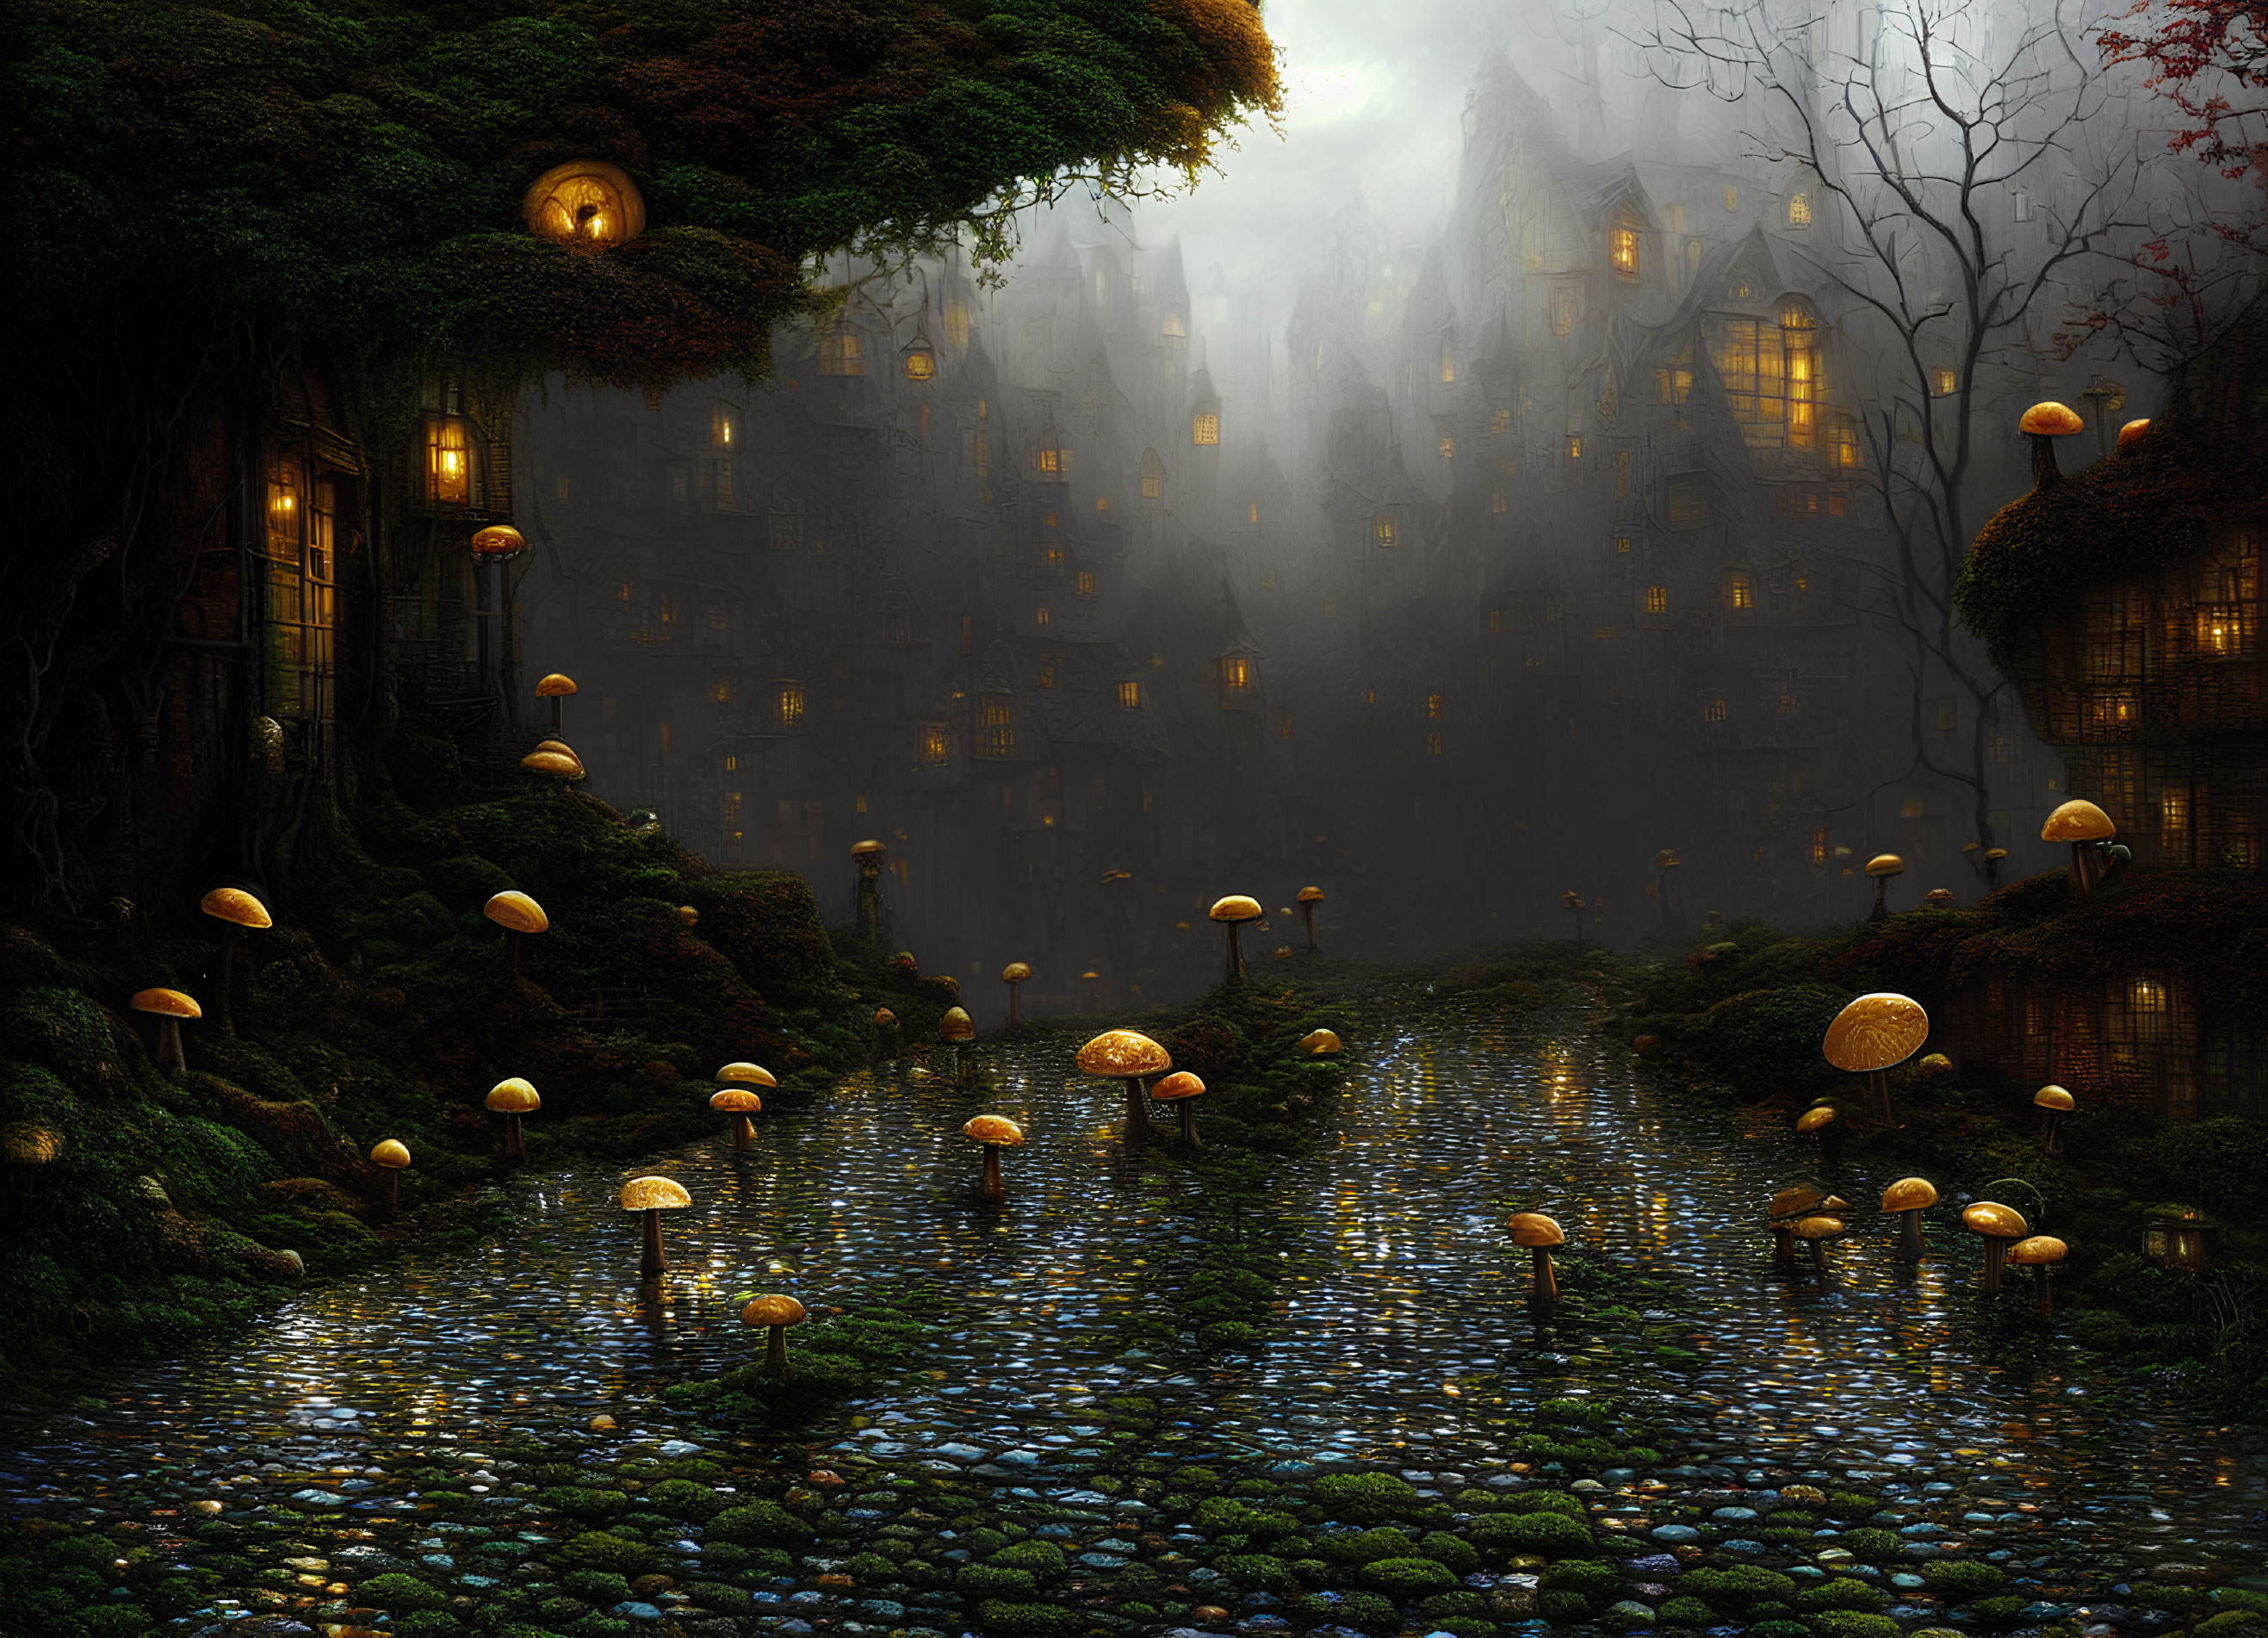 Enchanting forest scene with bioluminescent mushrooms, tree houses, and gothic buildings